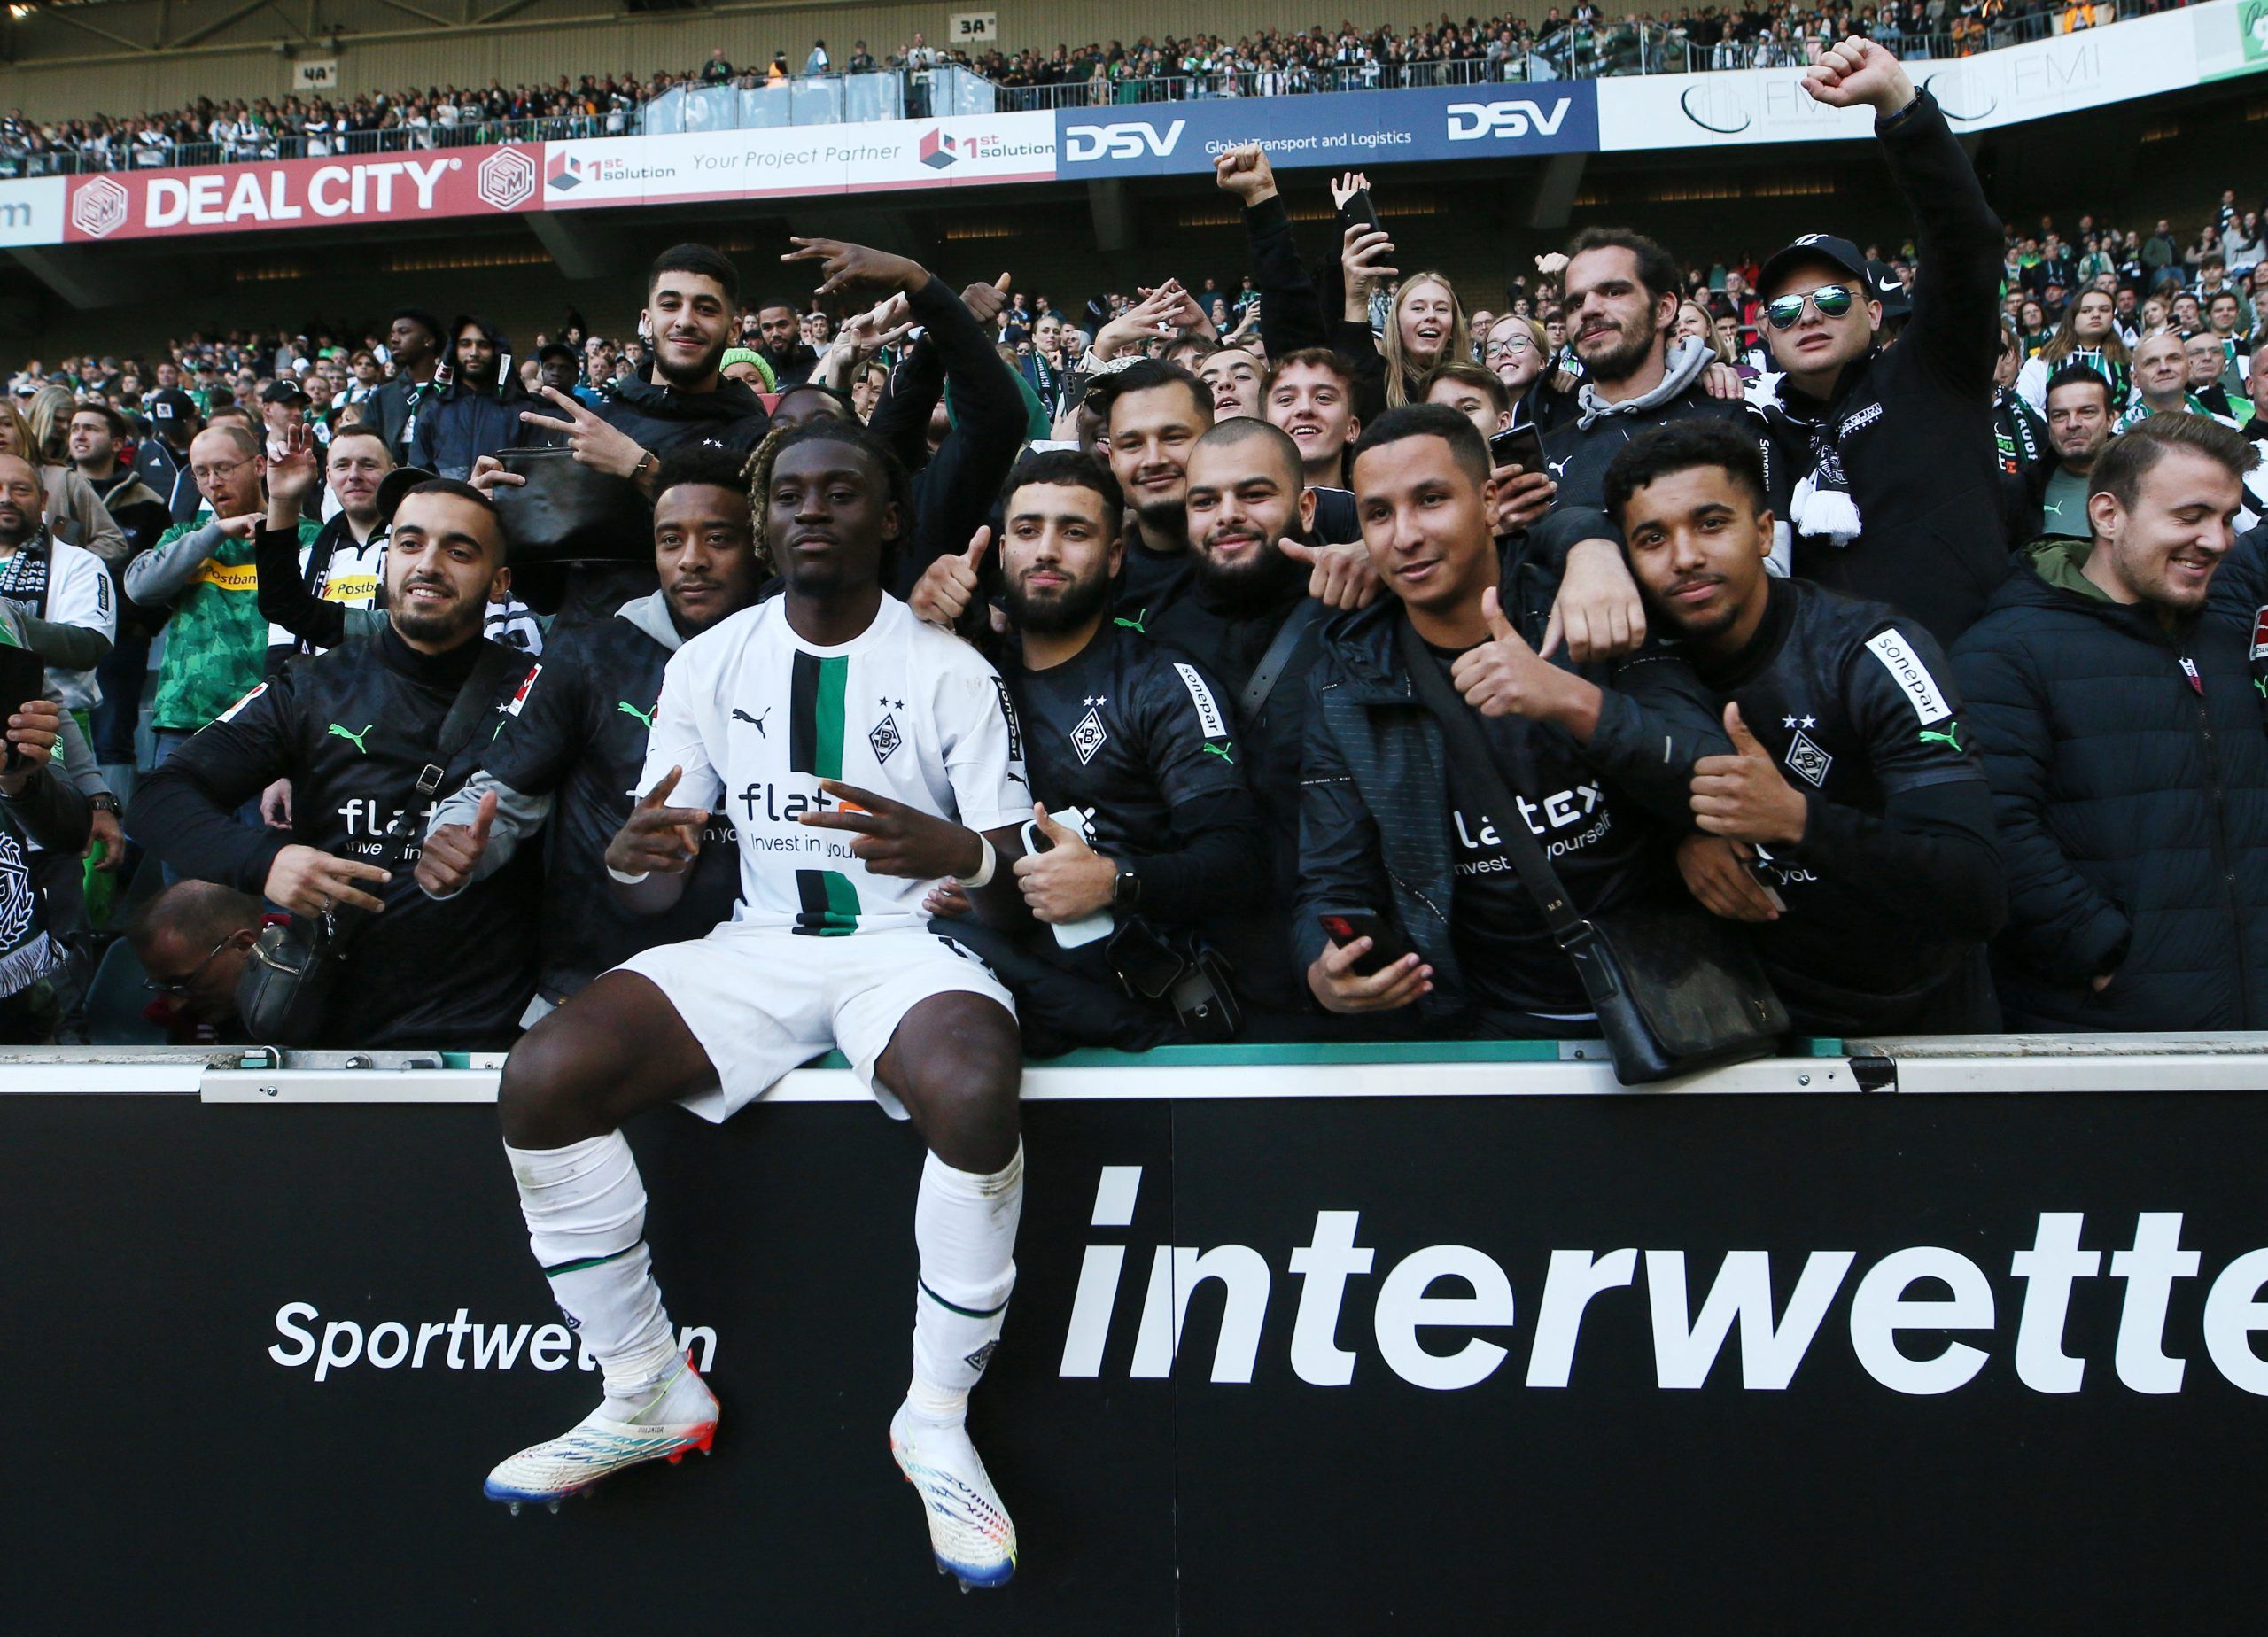 Soccer Football - Bundesliga - Borussia Moenchengladbach v FC Cologne - Borussia-Park, Moenchengladbach, Germany - October 9, 2022 Borussia Moenchengladbach's Kouadio Kone celebrates with fans after the match REUTERS/Thilo Schmuelgen DFL REGULATIONS PROHIBIT ANY USE OF PHOTOGRAPHS AS IMAGE SEQUENCES AND/OR QUASI-VIDEO.